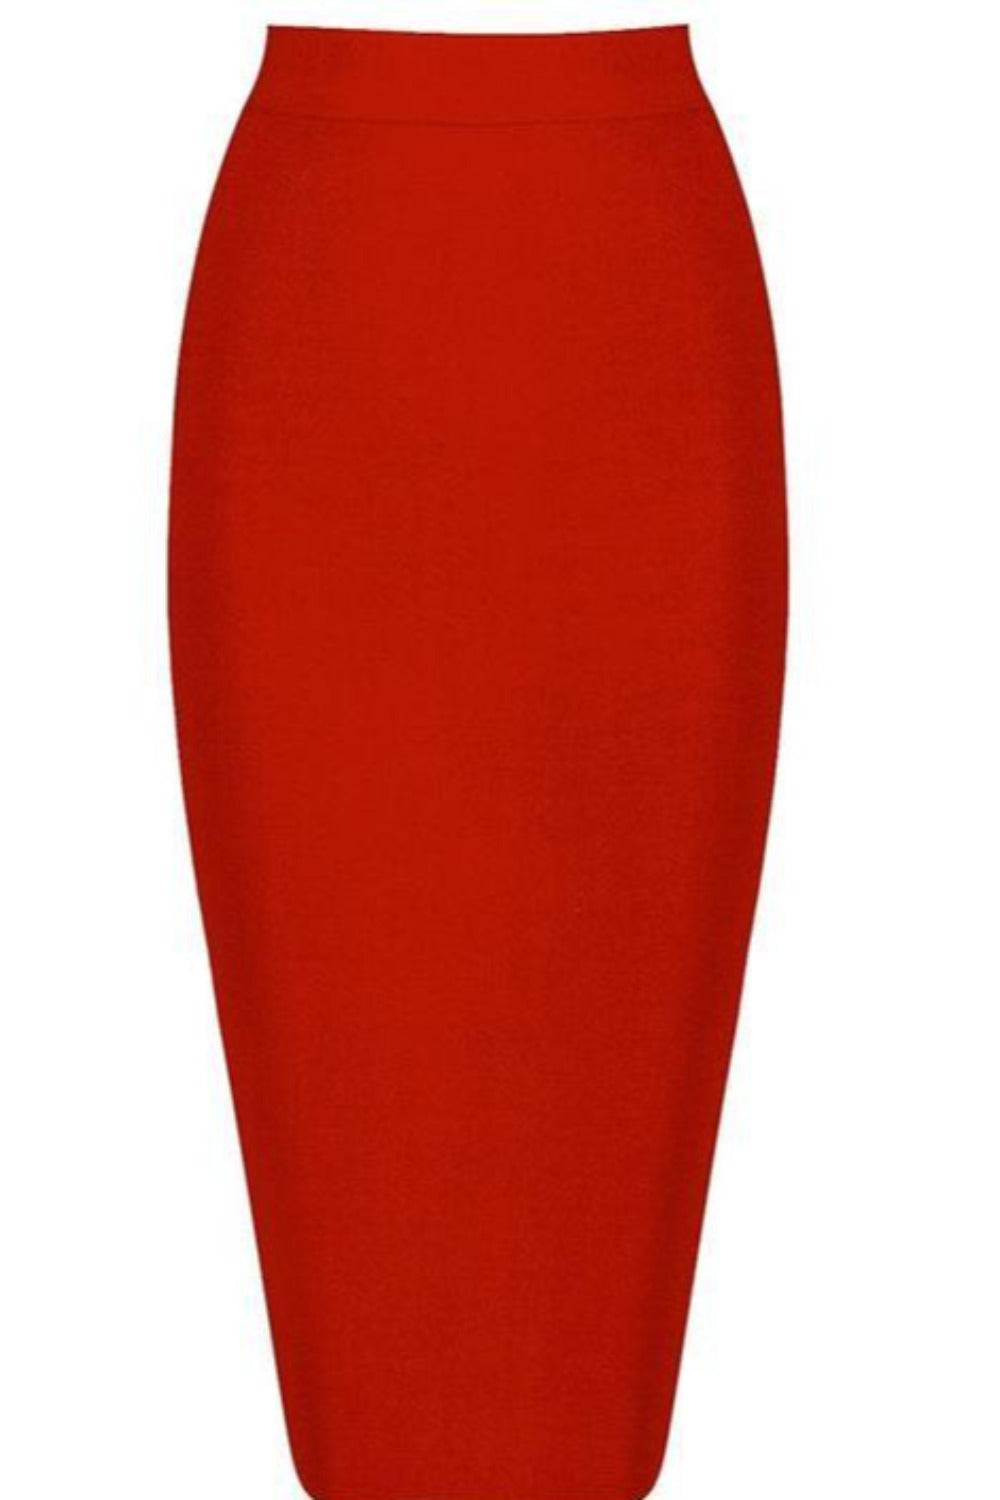 High Waisted Bodycon Pencil Skirt - TGC Boutique - Skirts